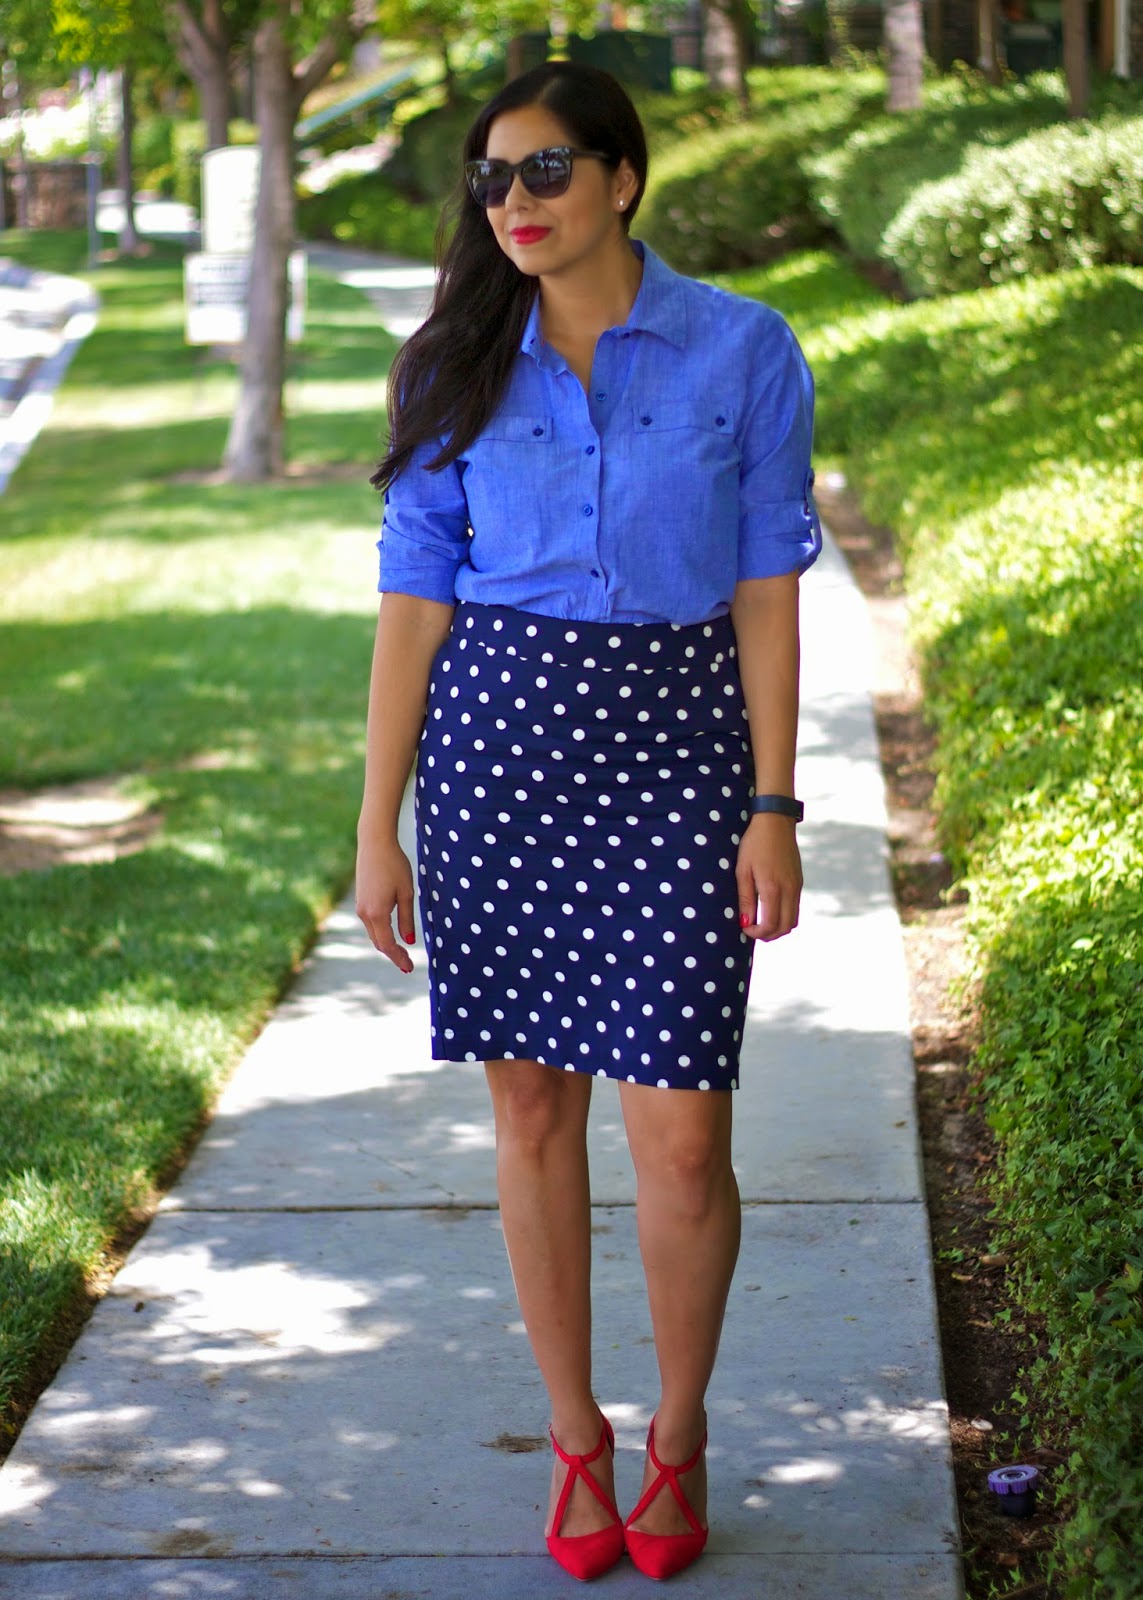 Red White and Blues | Lil bits of Chic by Paulina Mo - San Diego based ...